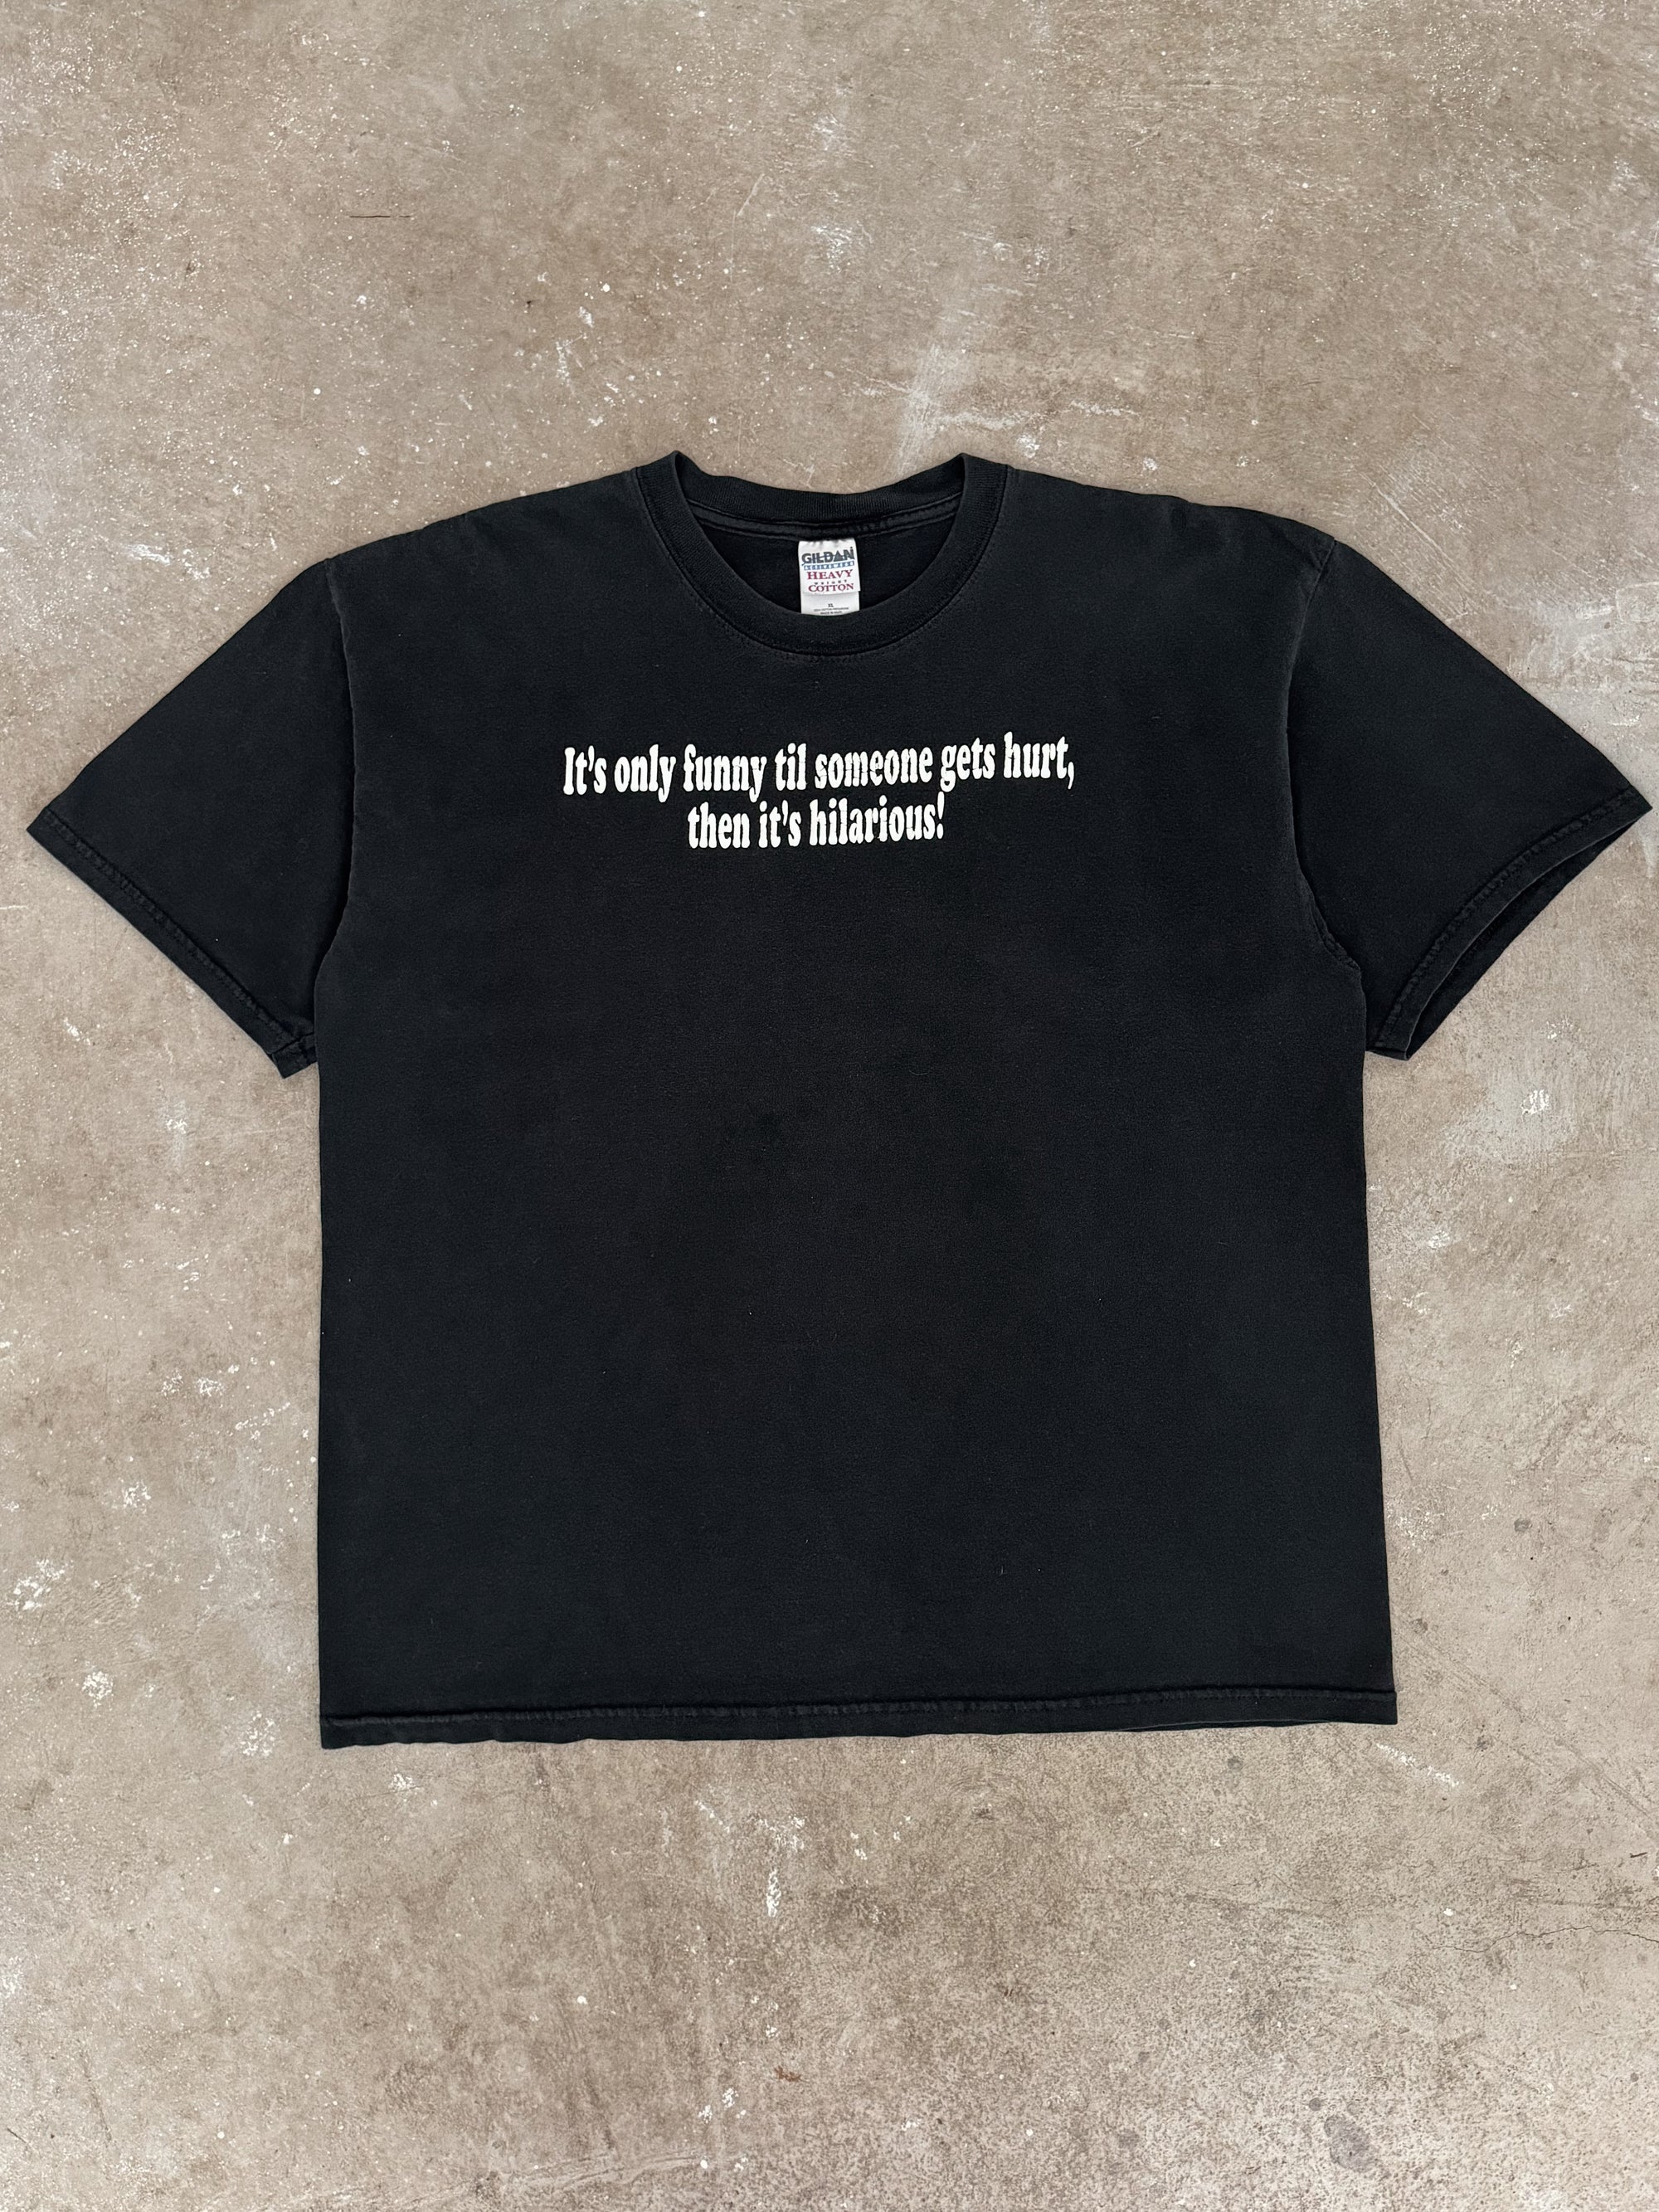 2000s "It's Only Funny Til Someone Gets Hurt" Tee (XL)